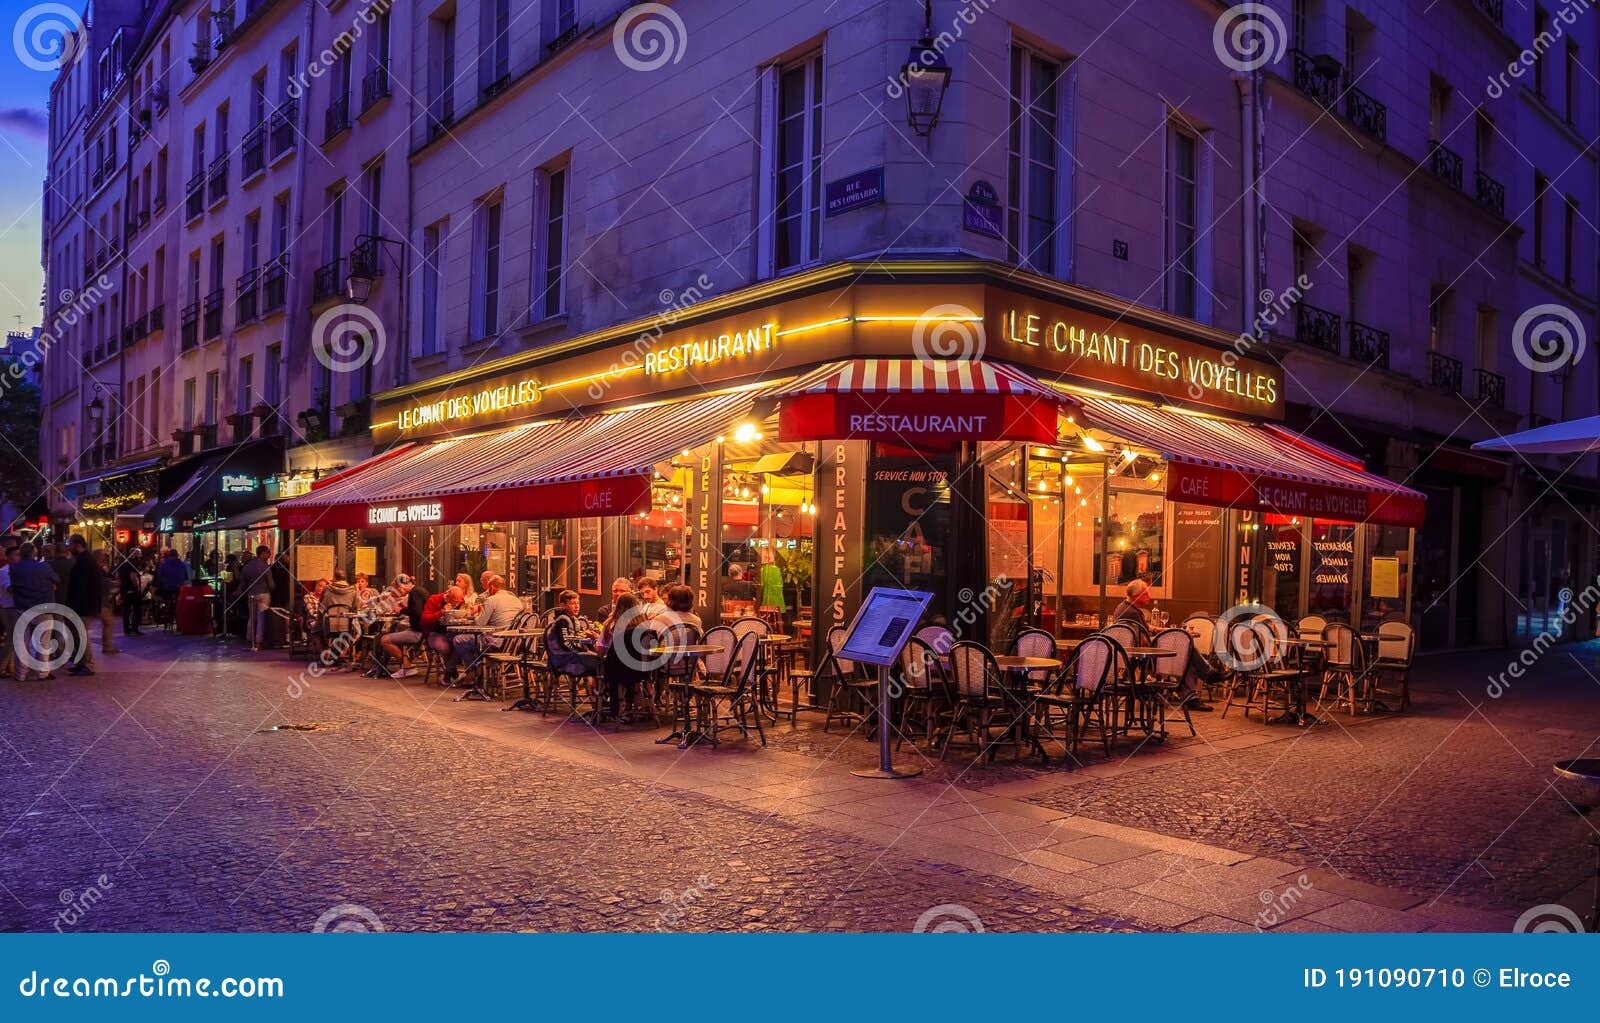 People in Cafes and Restaurants in the Streets of Paris Editorial Image ...